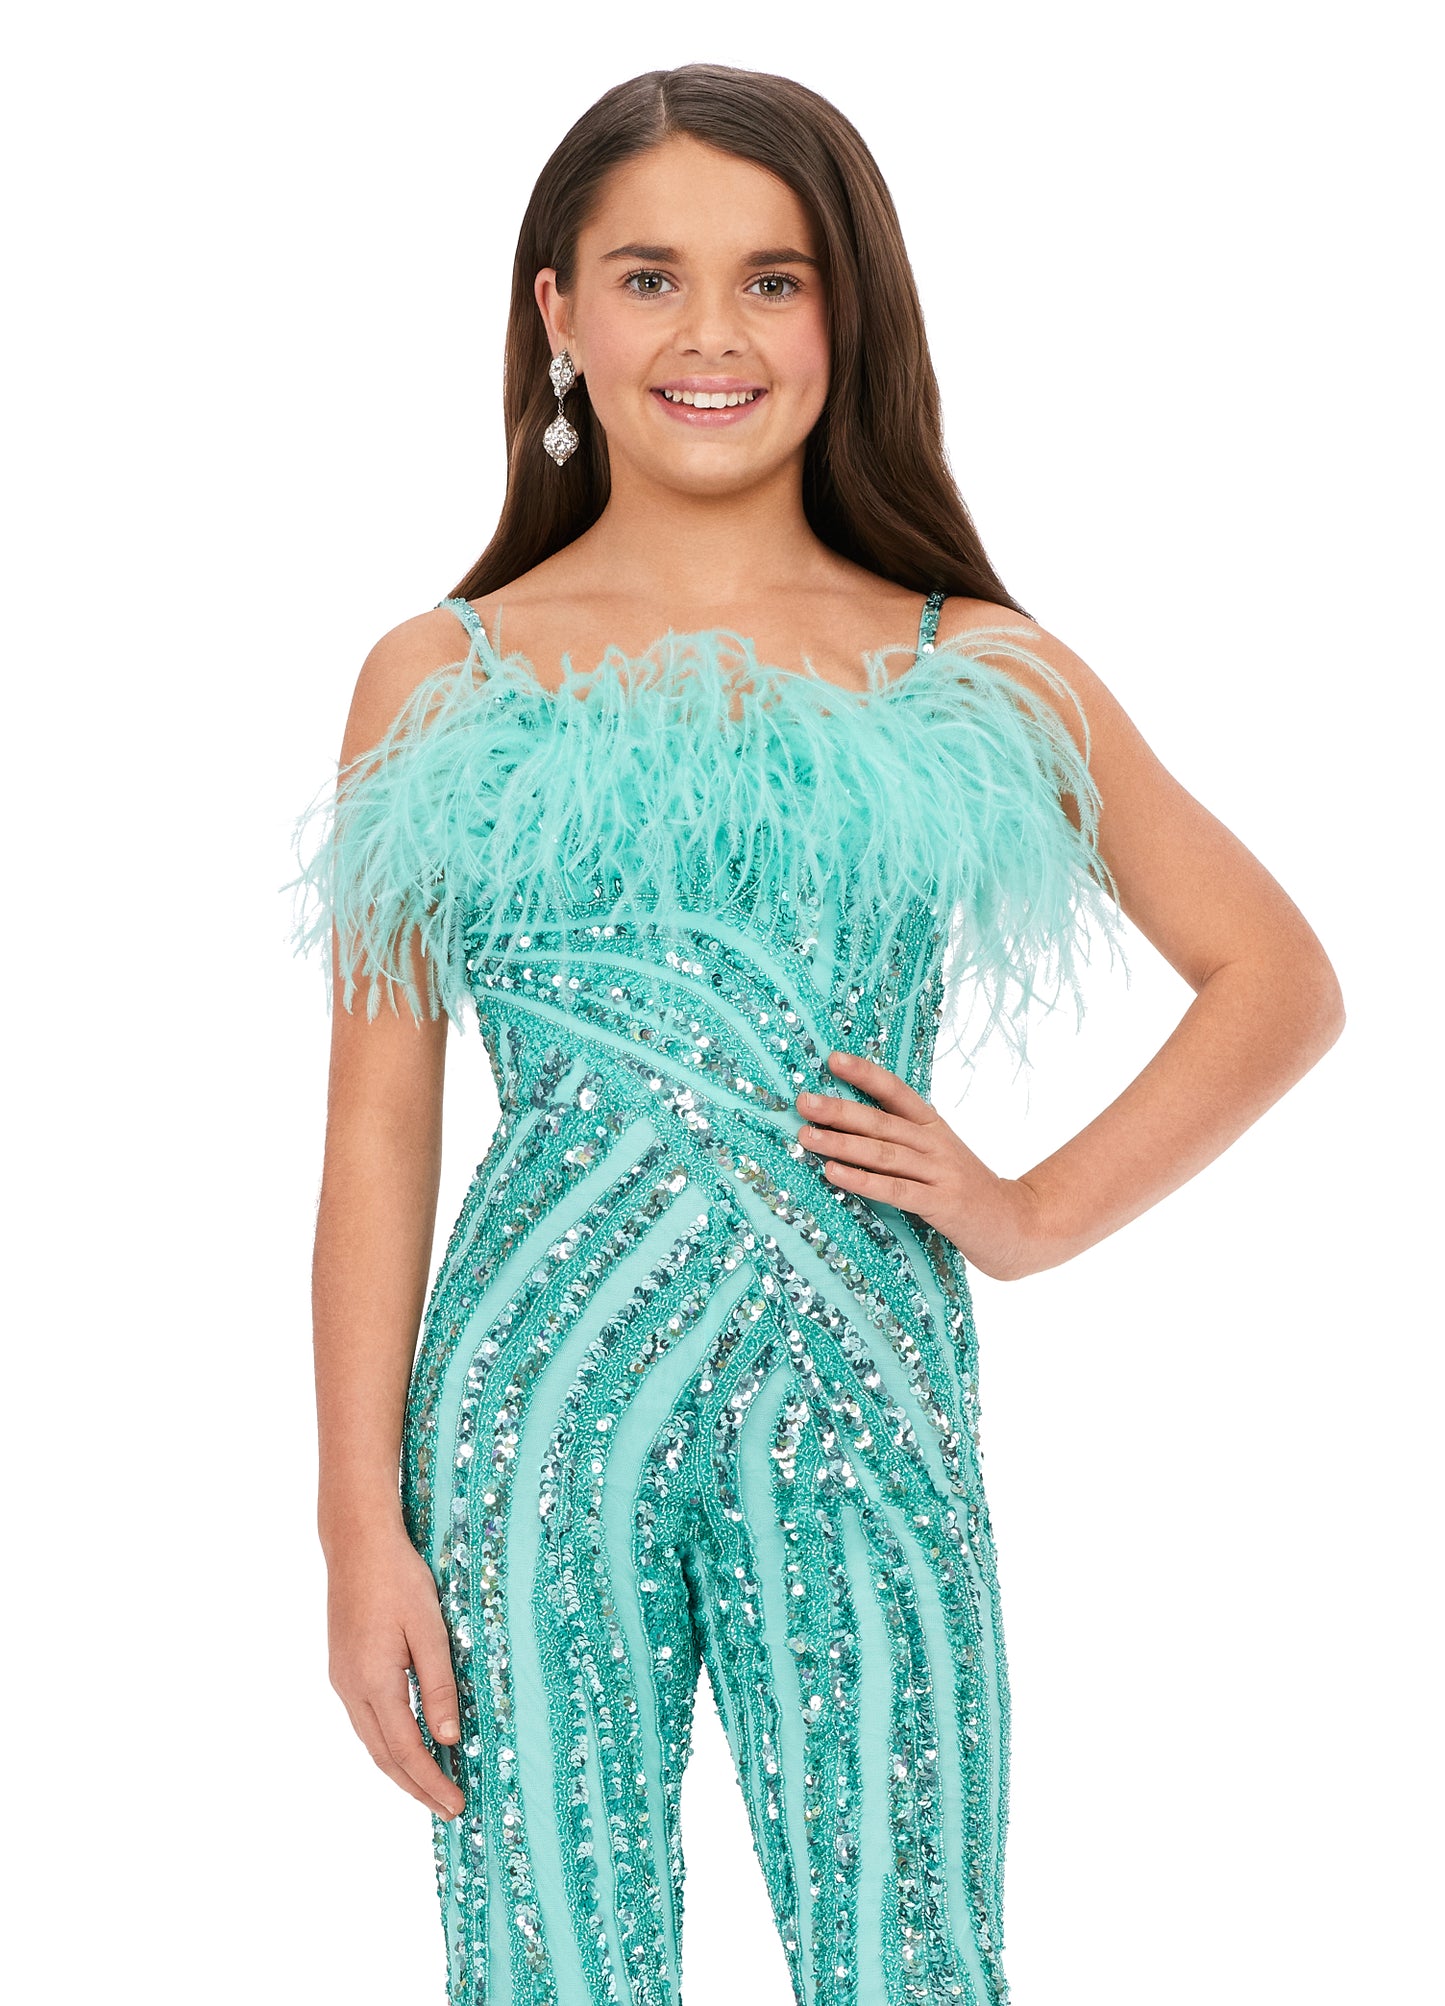 Make a show-stopping impression in this beautiful Ashley Lauren Kids 8235 Girls Beaded Long Pageant Jumpsuit. Featuring intricate bead pattern, sparkly sequins and feather details on the neckline, it's the perfect choice for your formalwear needs. Fully beaded design ensures a standout look in any pageant or special event.  Sizes: 4-16  Colors: Aqua, Candy Pink, Periwinkle